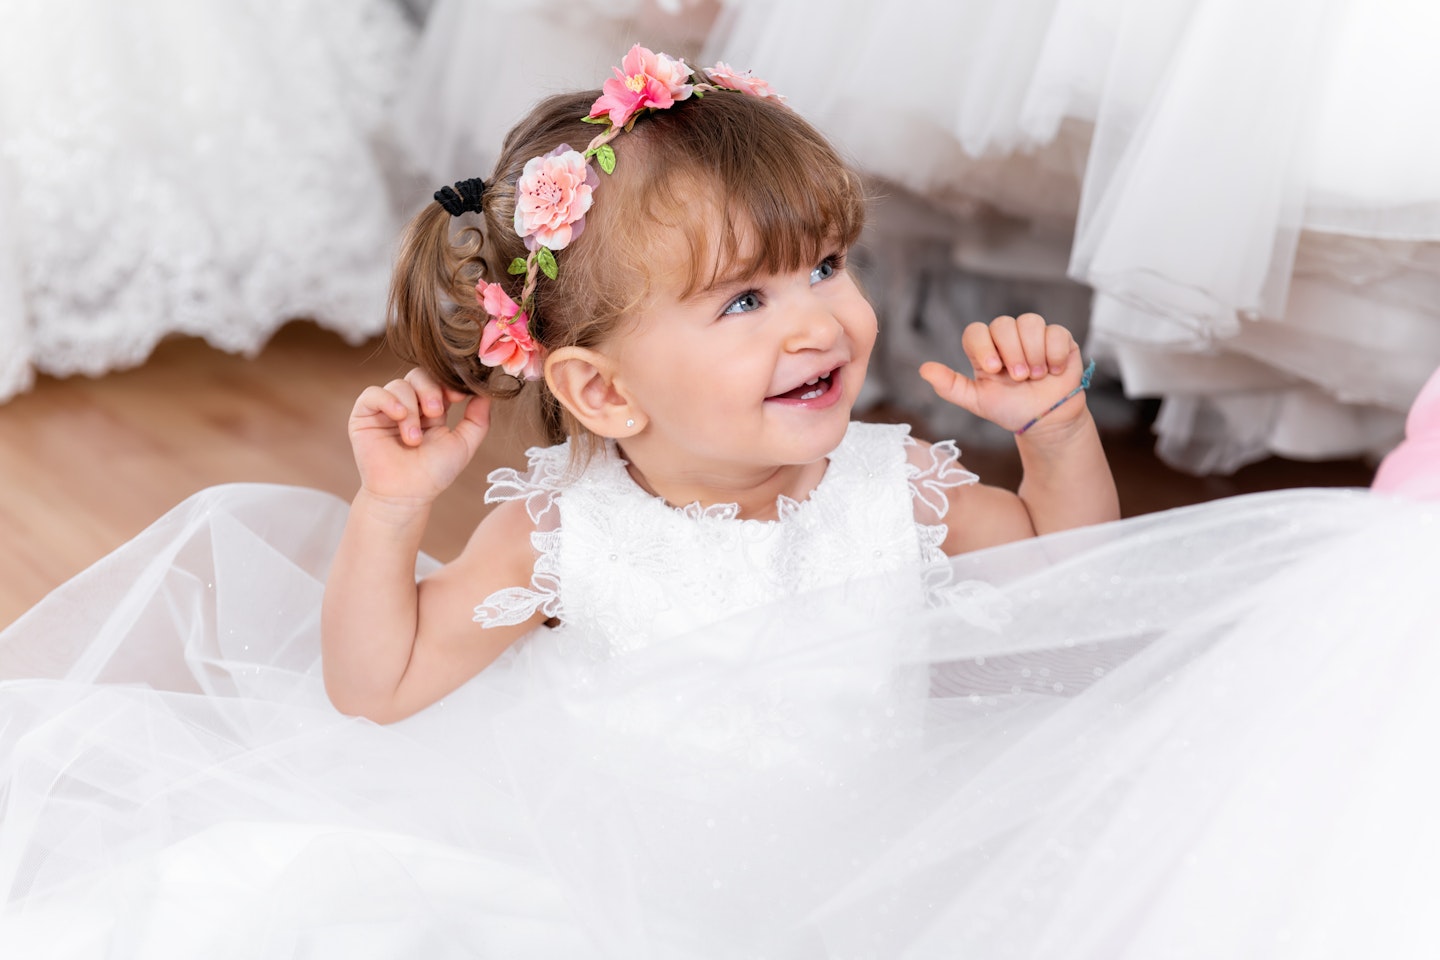 Portrait of 18 months old baby girl smiling and playing at store. Small girl wearing flower wreath and trying on dress at bridal boutique.